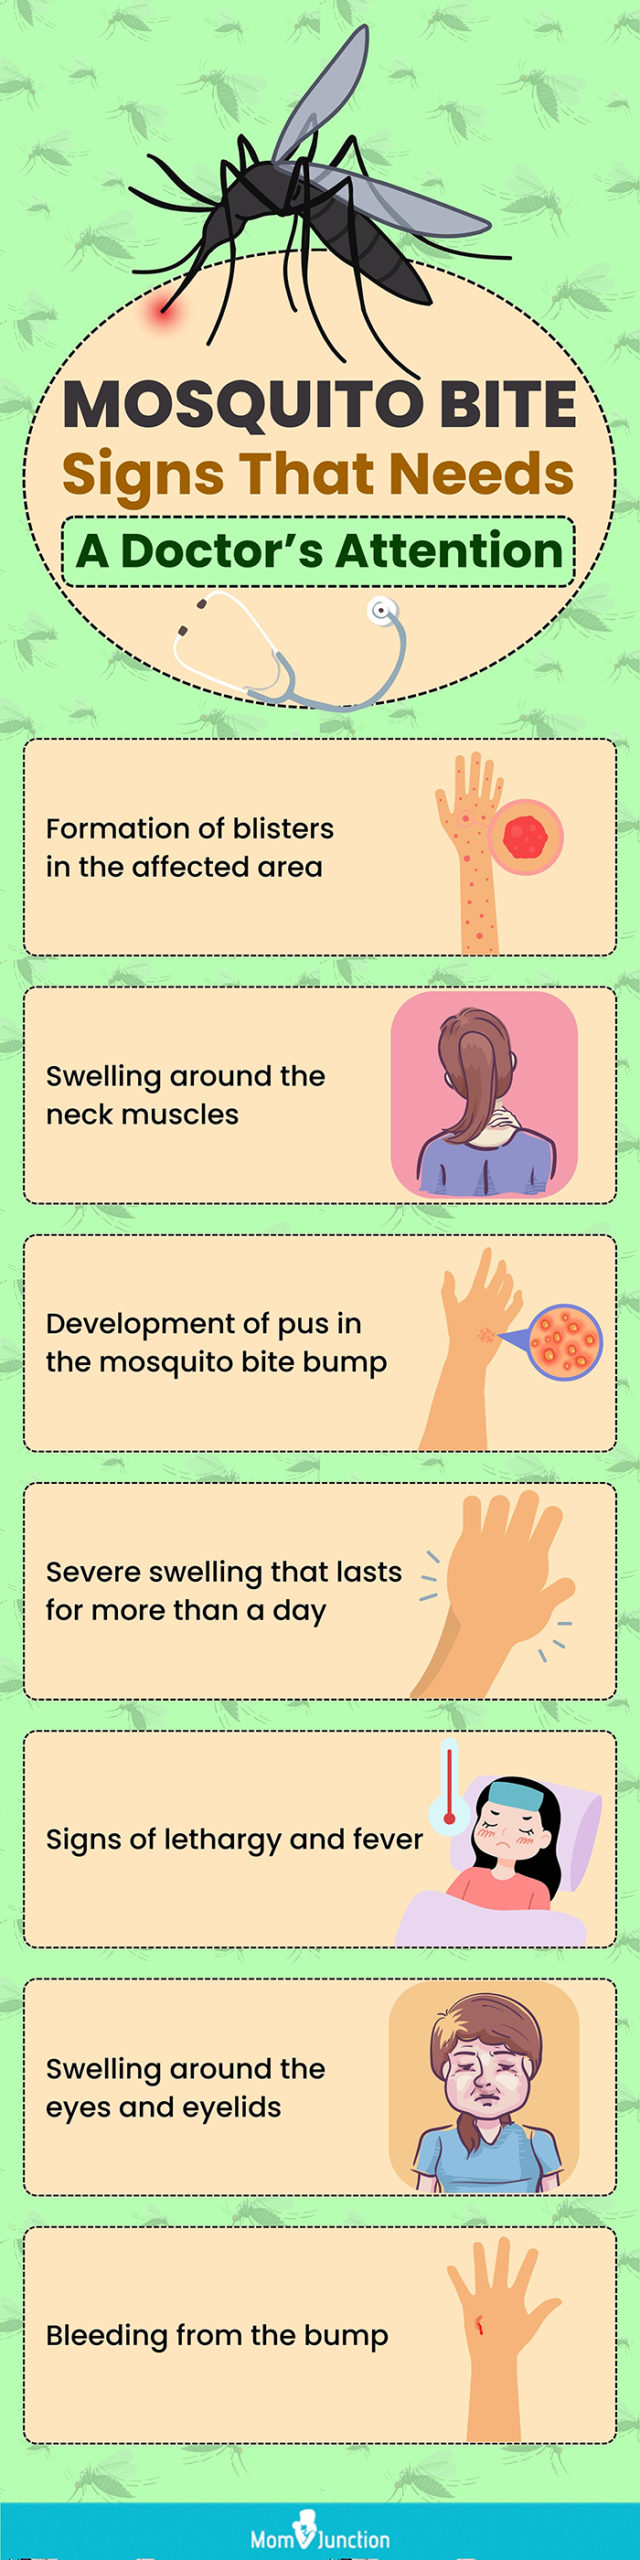 mosquito bite signs that needs a doctor’s attention (infographic)